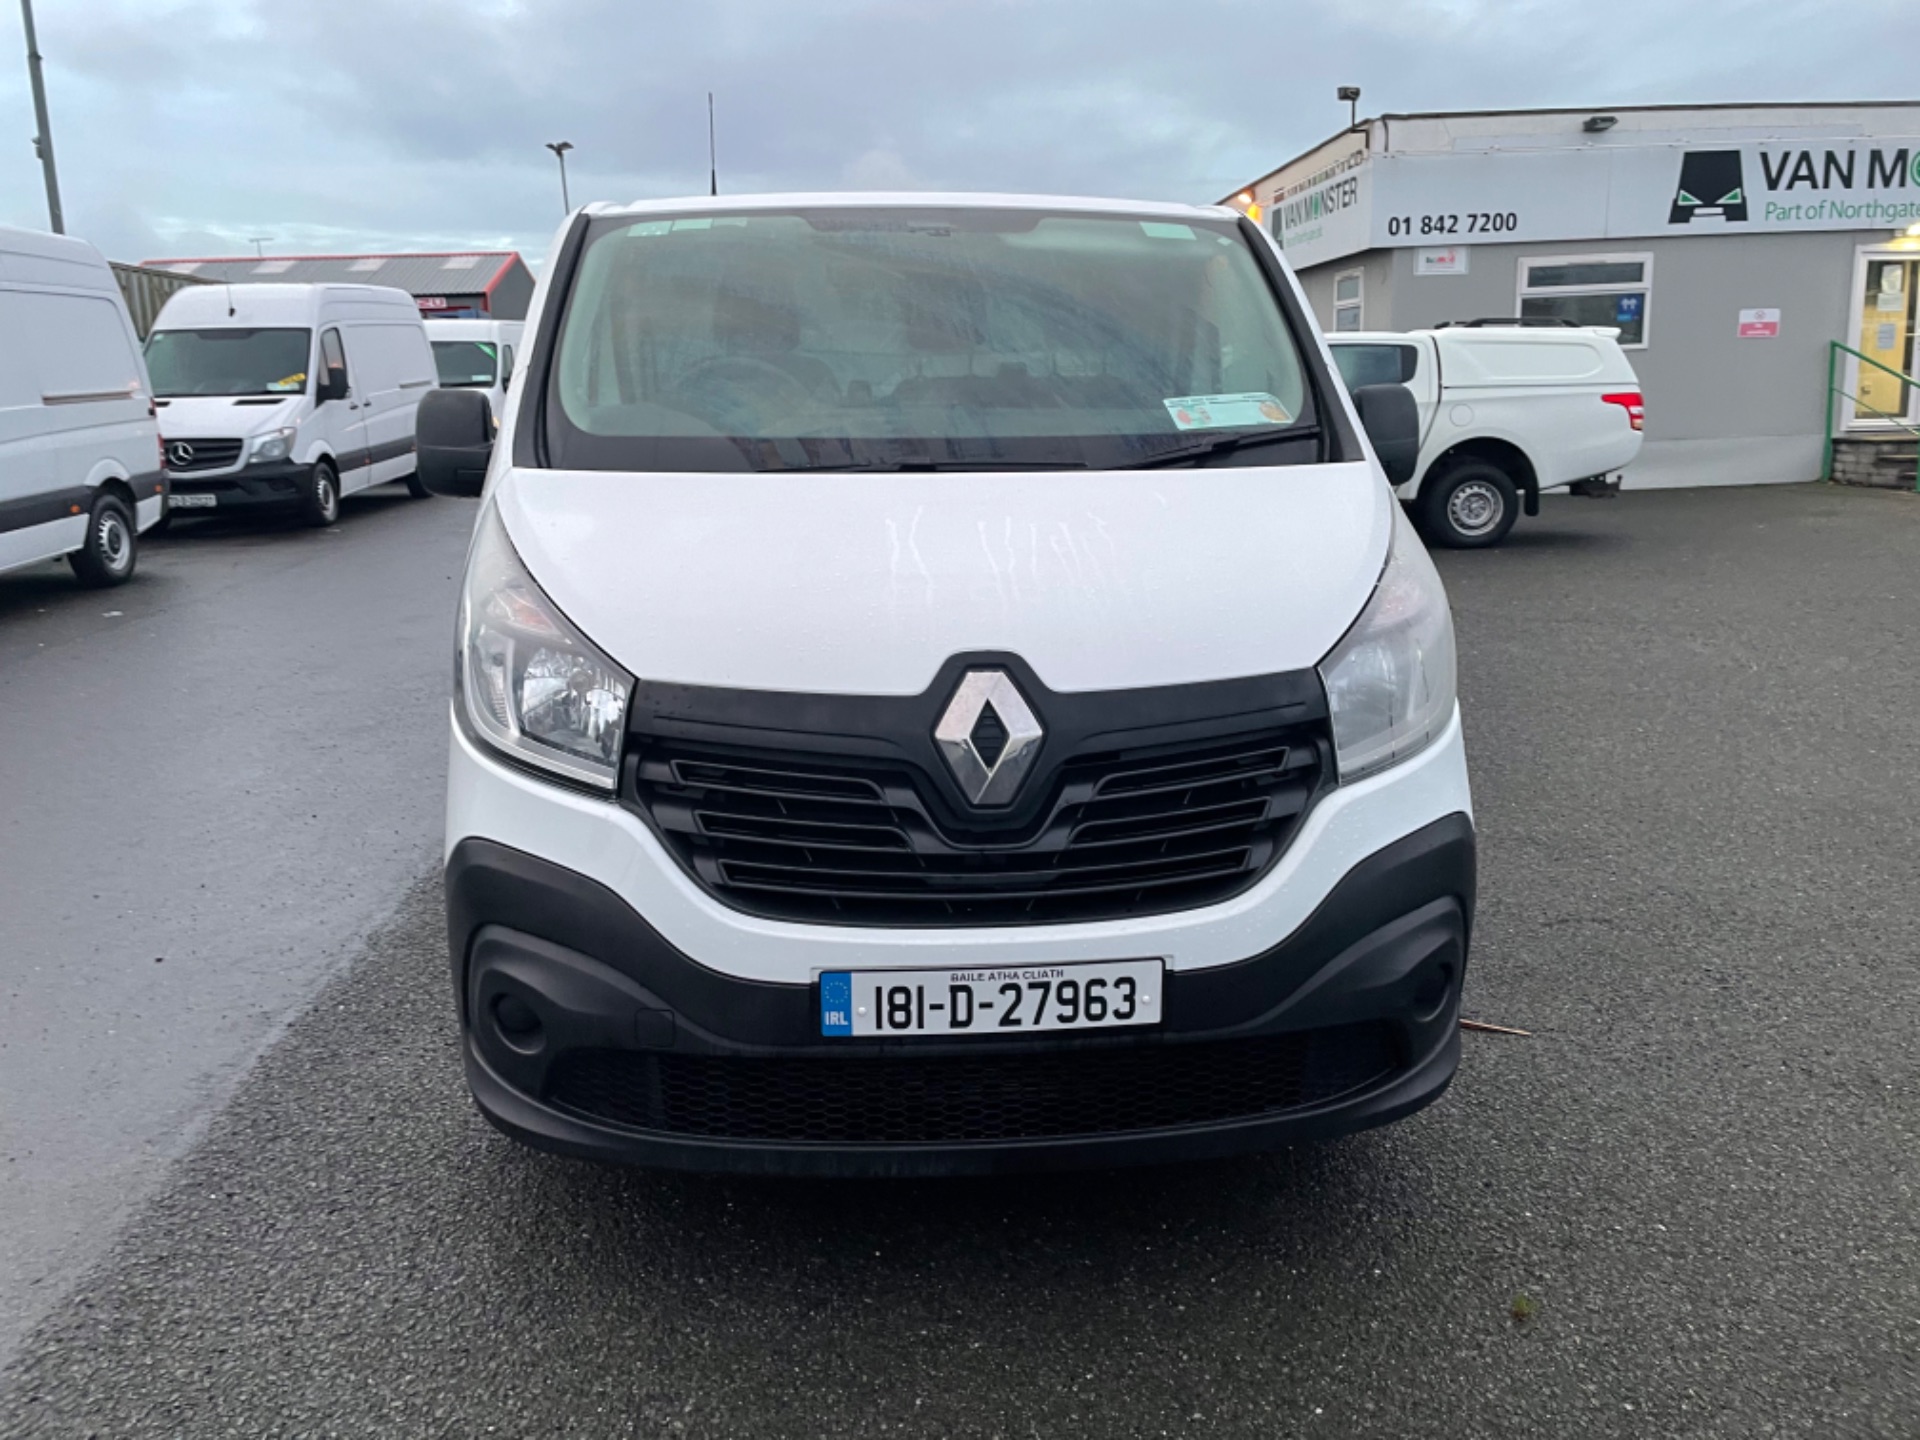 2018 Renault Trafic LL29 DCI 120 Business 3DR (181D27963) Thumbnail 2